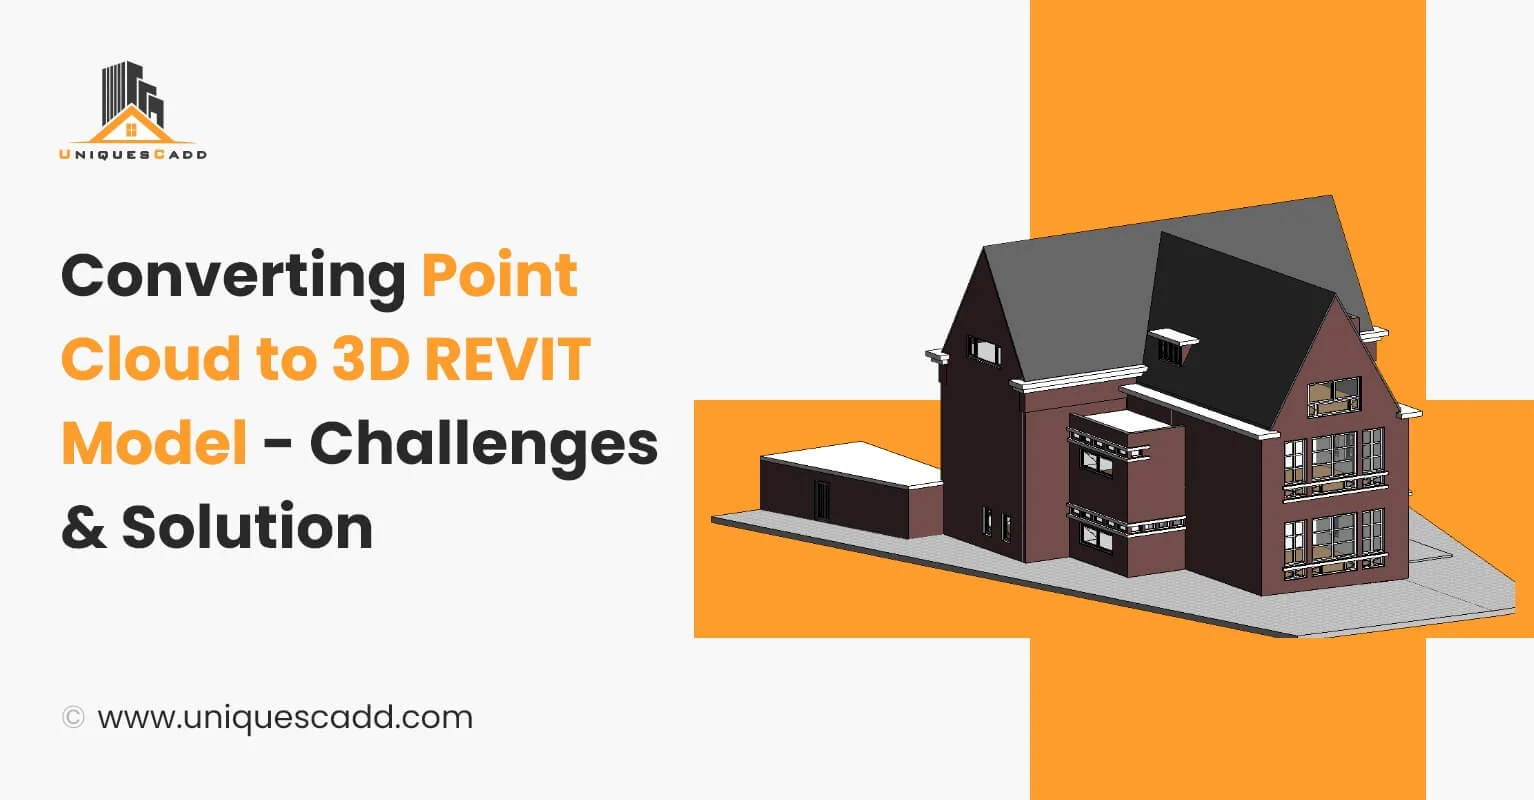 Converting Point Cloud to 3D REVIT Model - Challenges & Solution